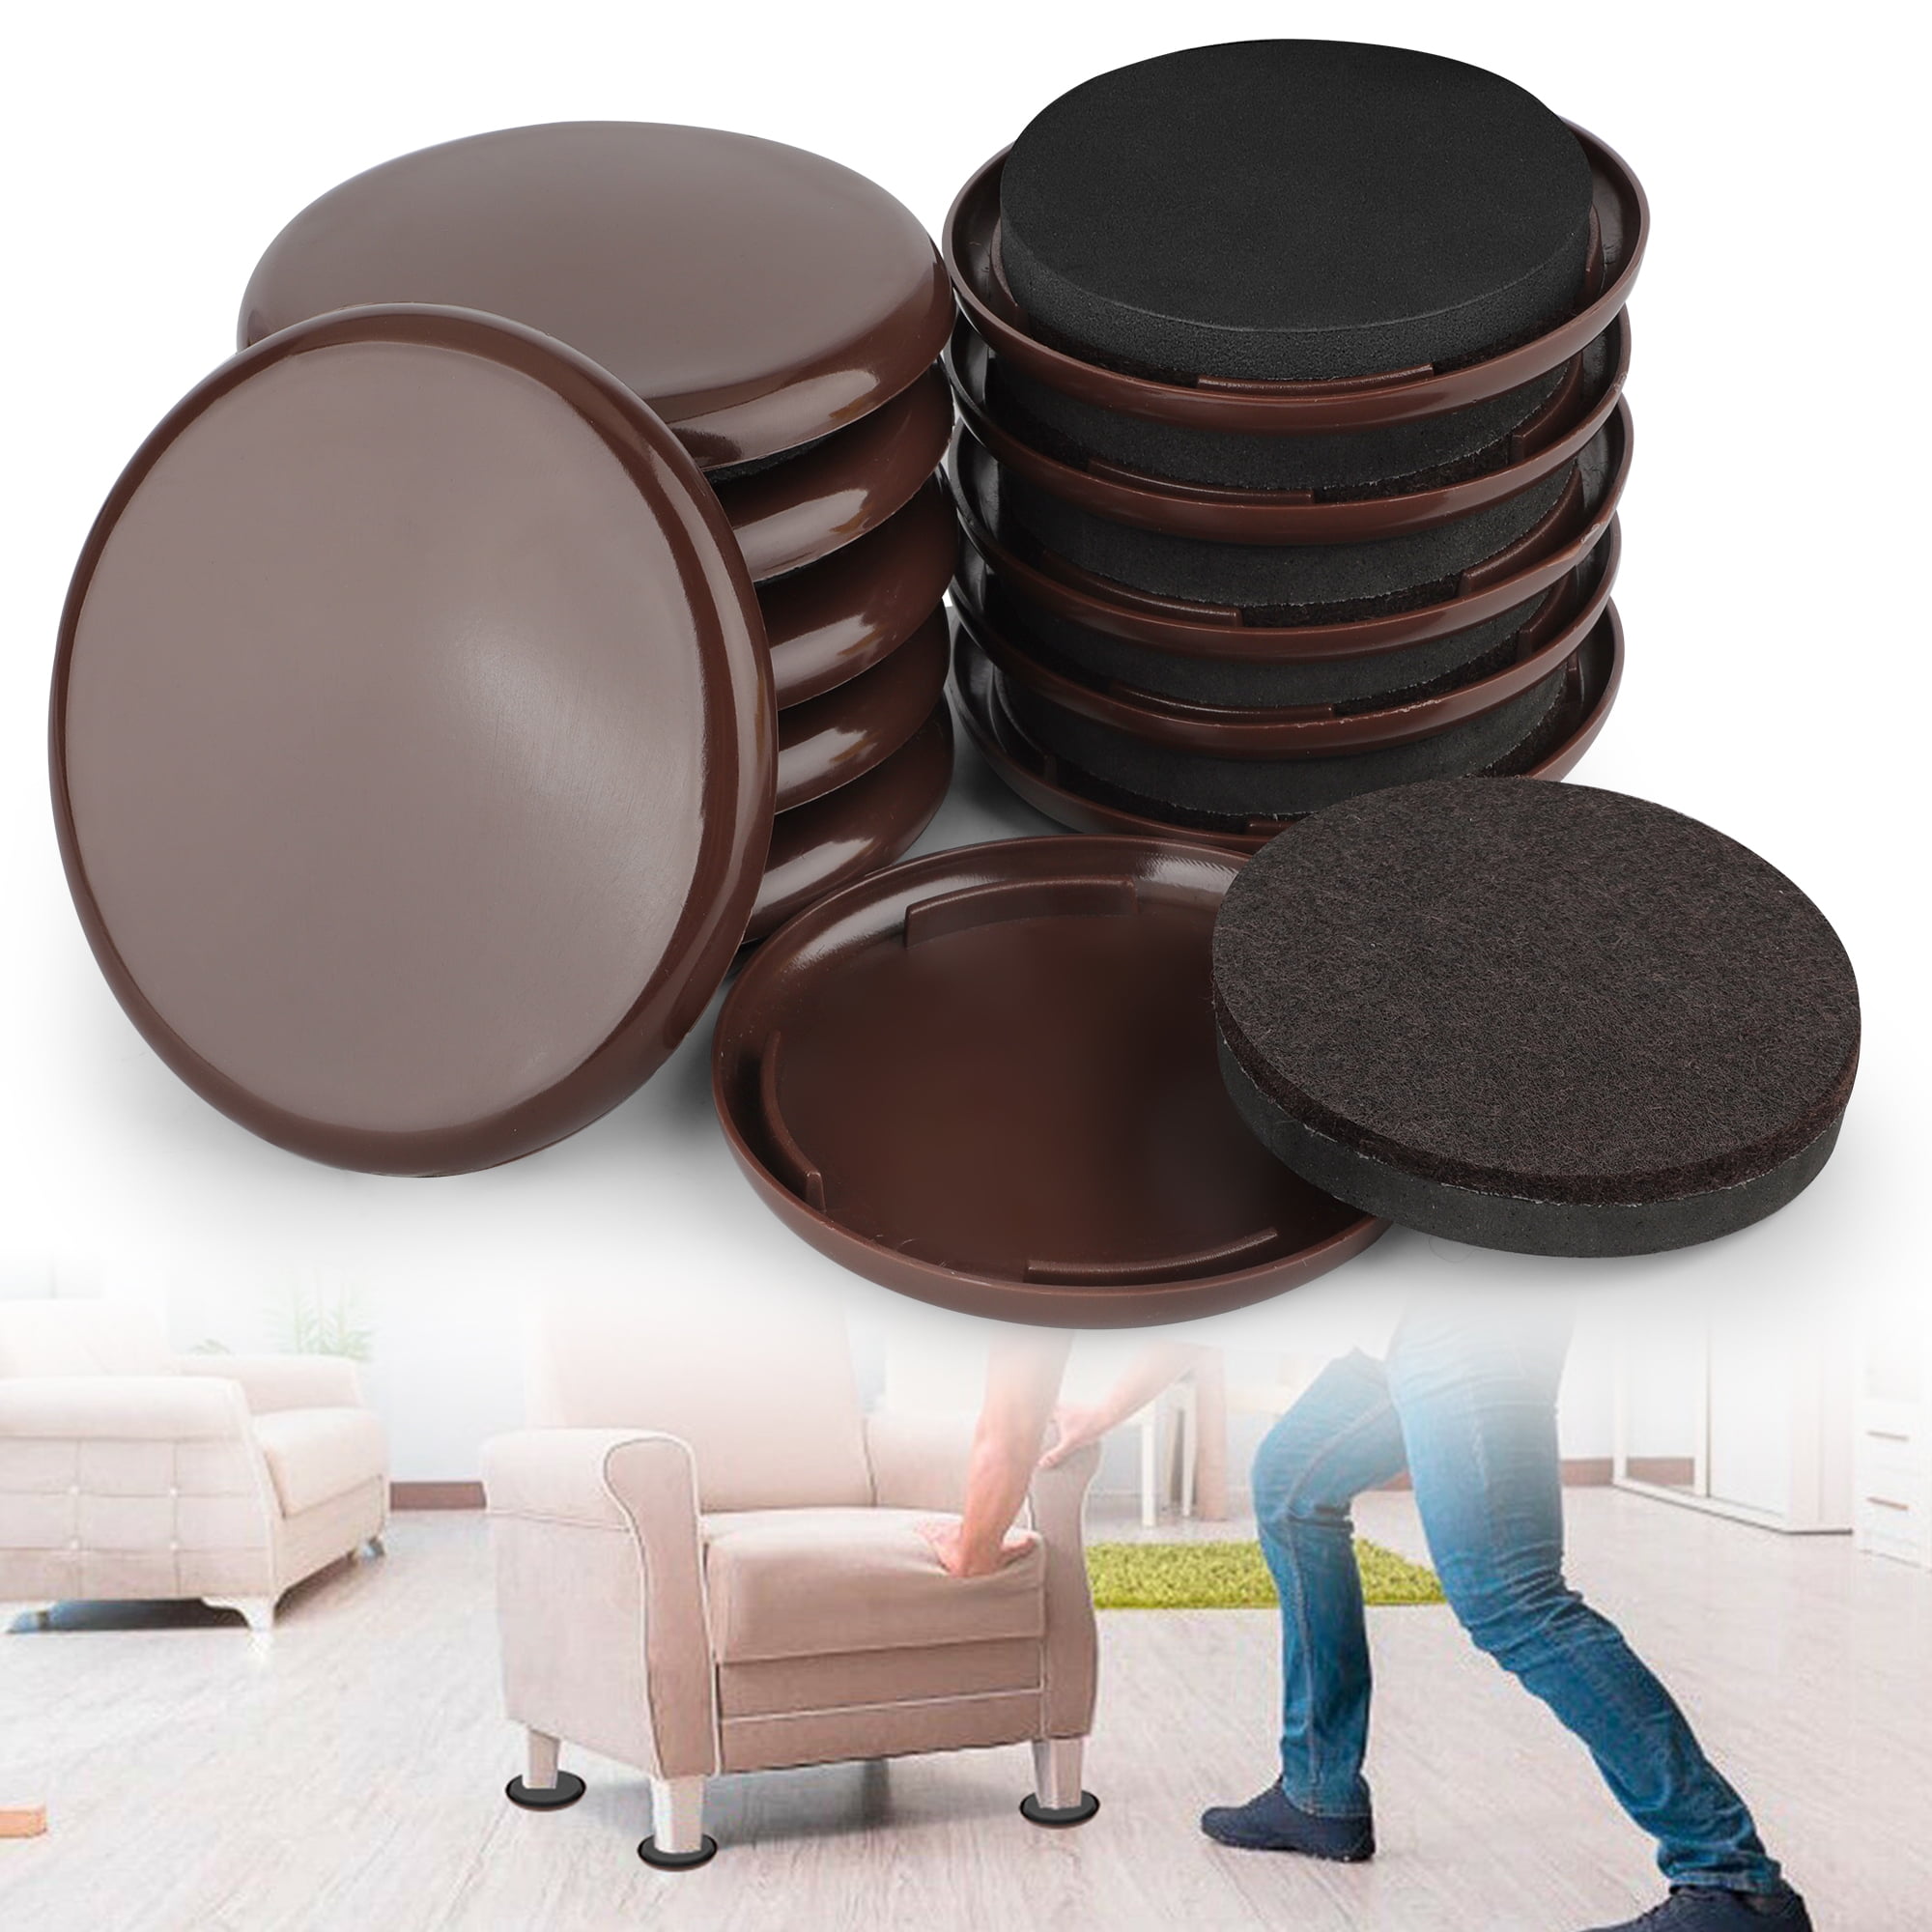 16 Pcs Furniture Sliders, Reusable Heavy Furniture Movers, 3.5inch Round Furniture  Sliders, Furniture Moving Kit for Carpeted and Hard Floor Surfaces Felt Pads  Sliders, Suitable for All Furniture 